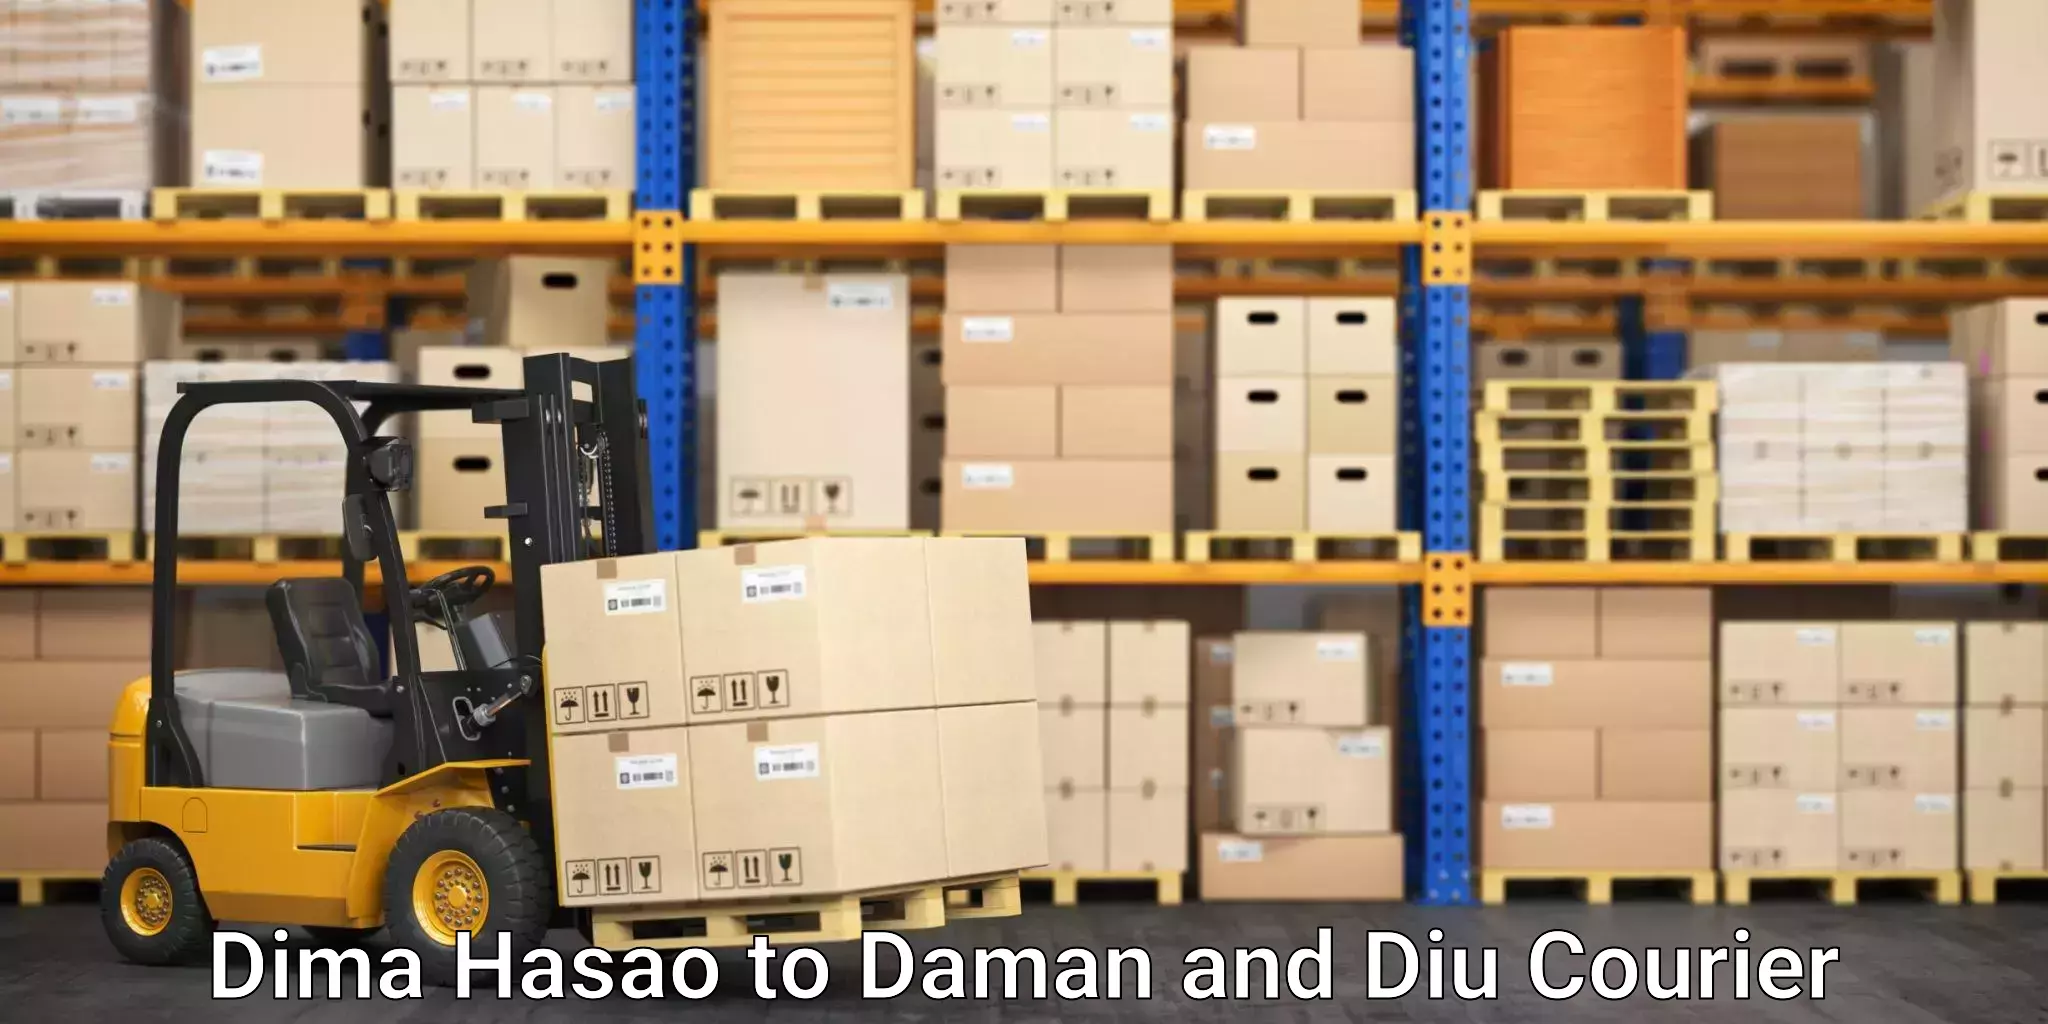 Reliable parcel services Dima Hasao to Daman and Diu